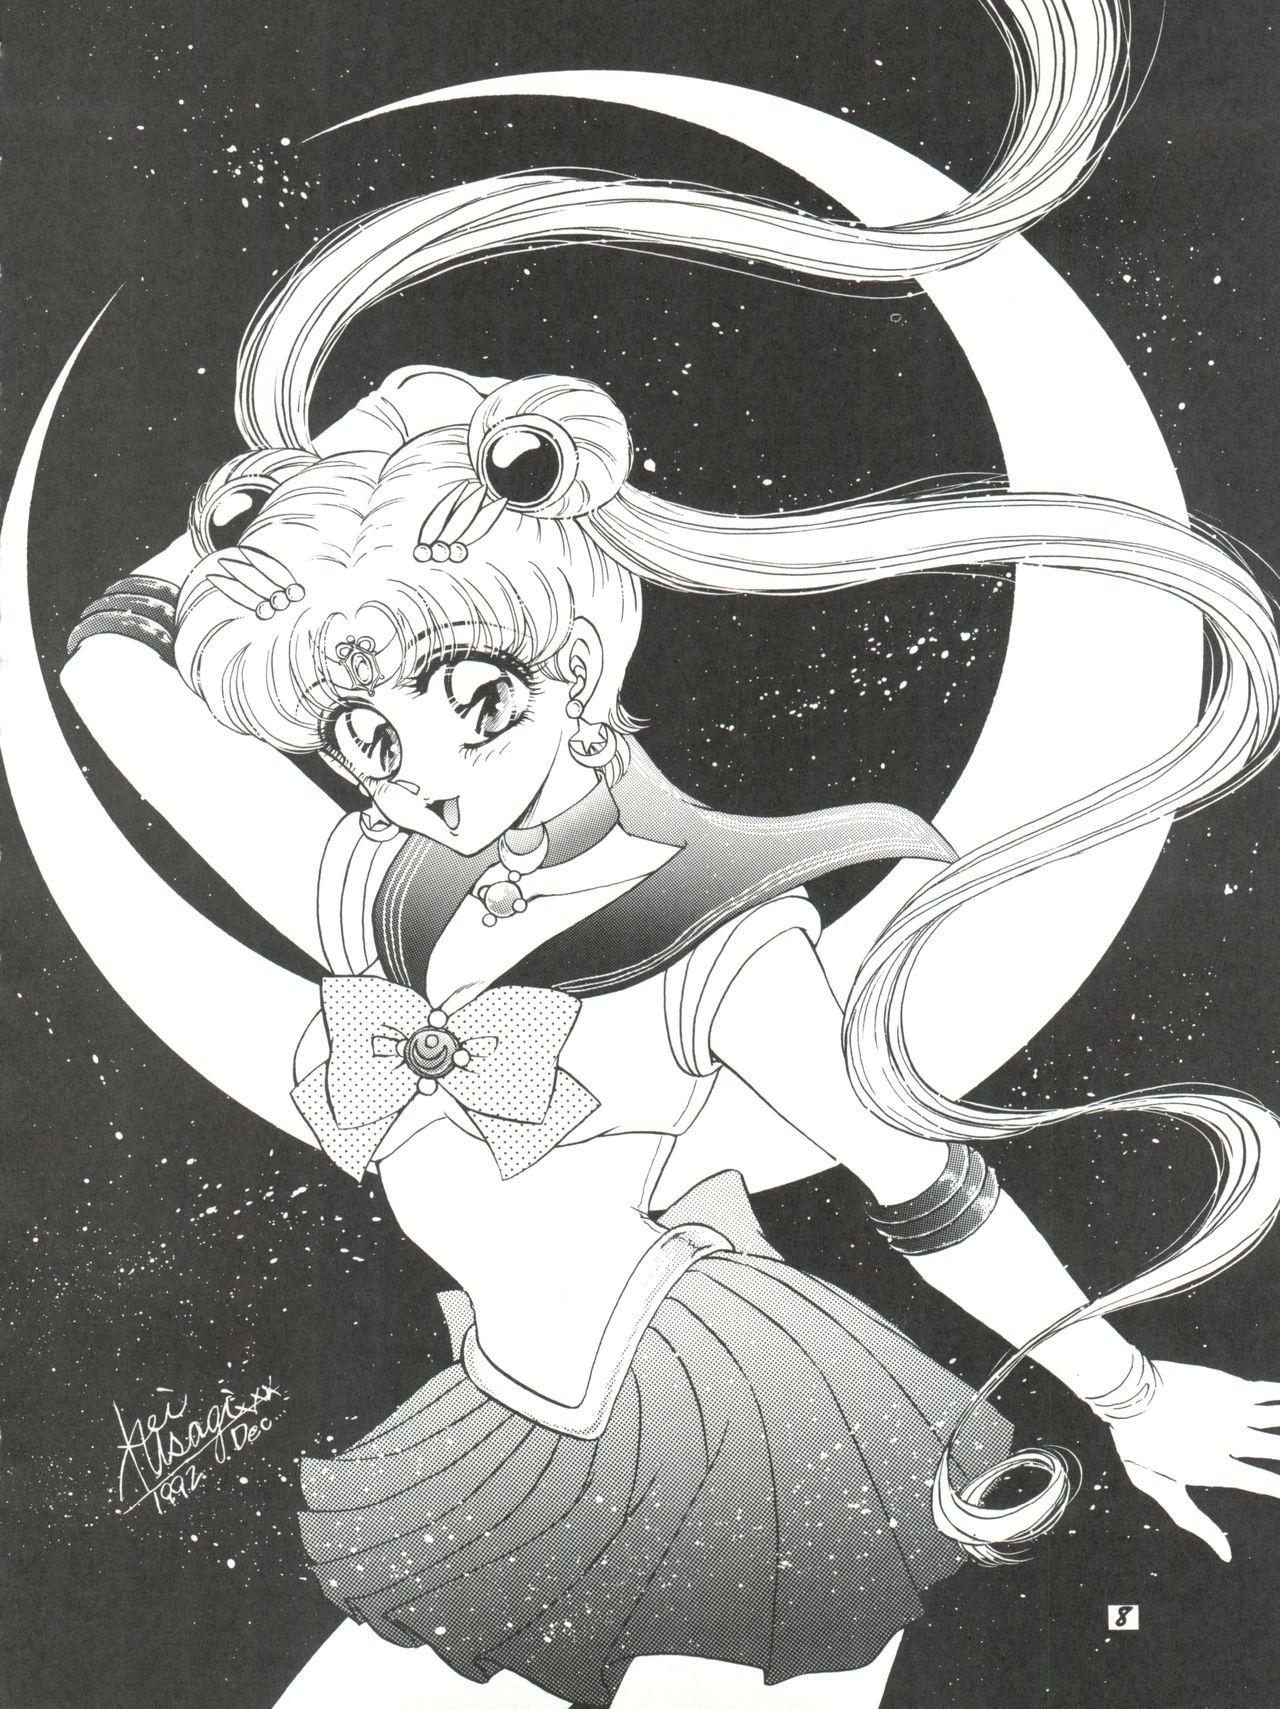 Glamour Porn Kangethu Hien Vol. 2 - Sailor moon From - Page 8